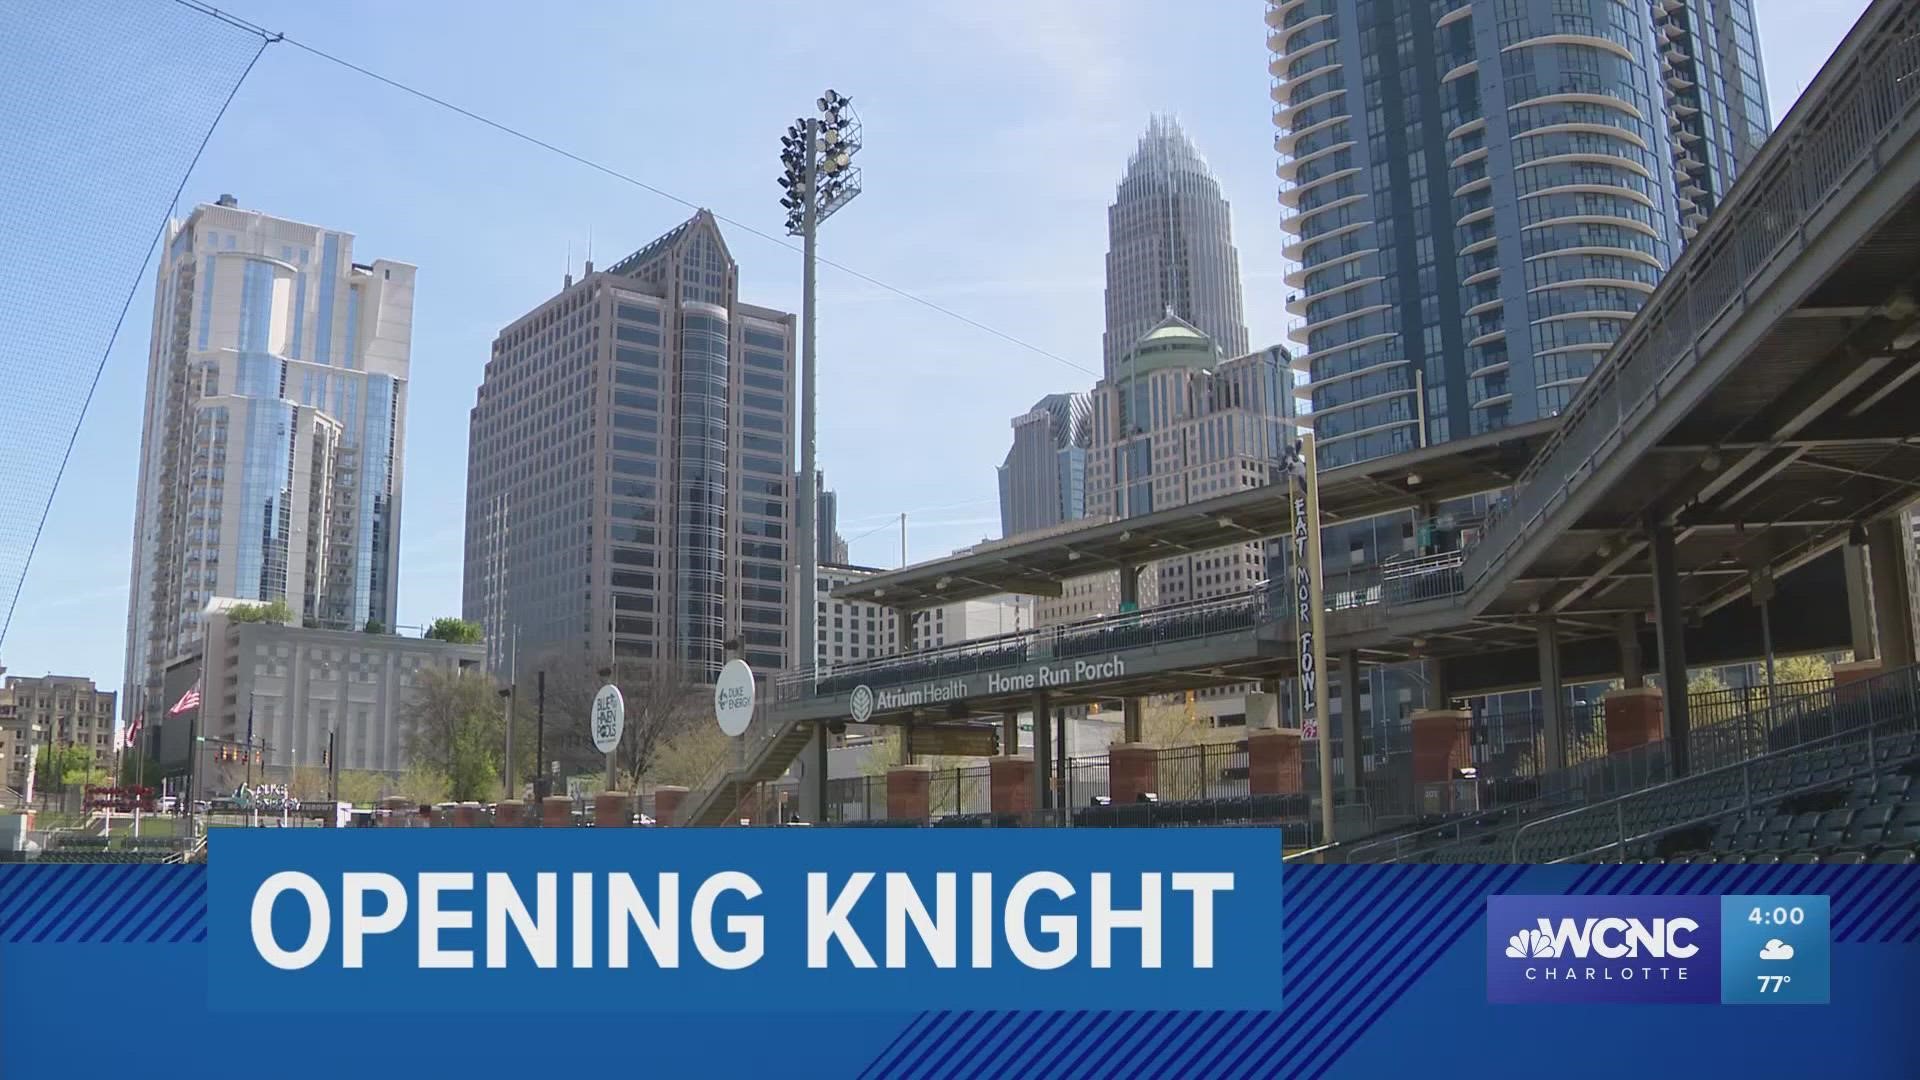 Join the WCNC Charlotte team as we get an up close look ahead of Opening Knight at Truist Field!